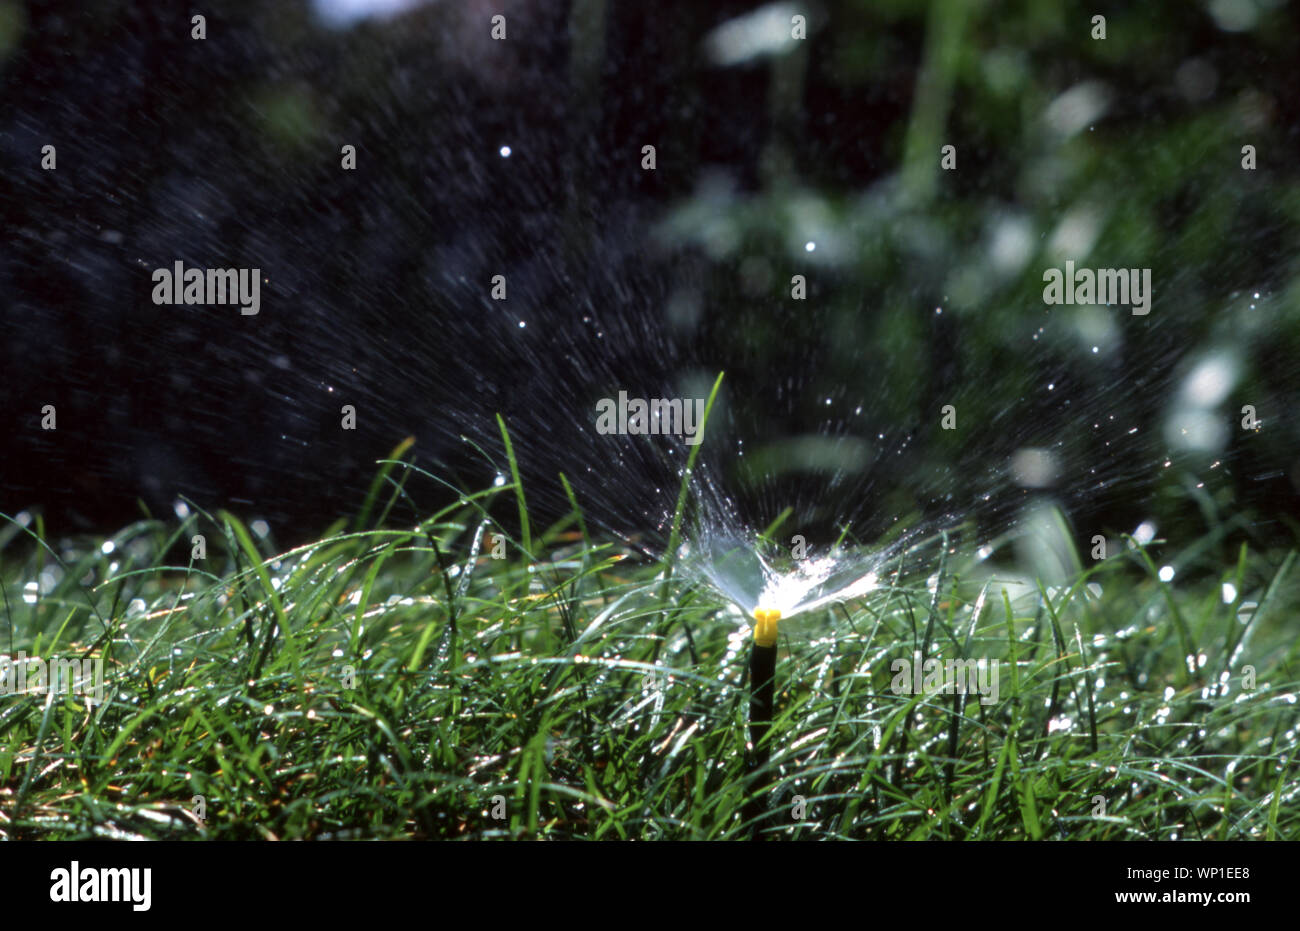 CLOSE-UP OF A GARDEN WATERING SYSTEM OPERATING (OPERATES ON TIMER). Stock Photo